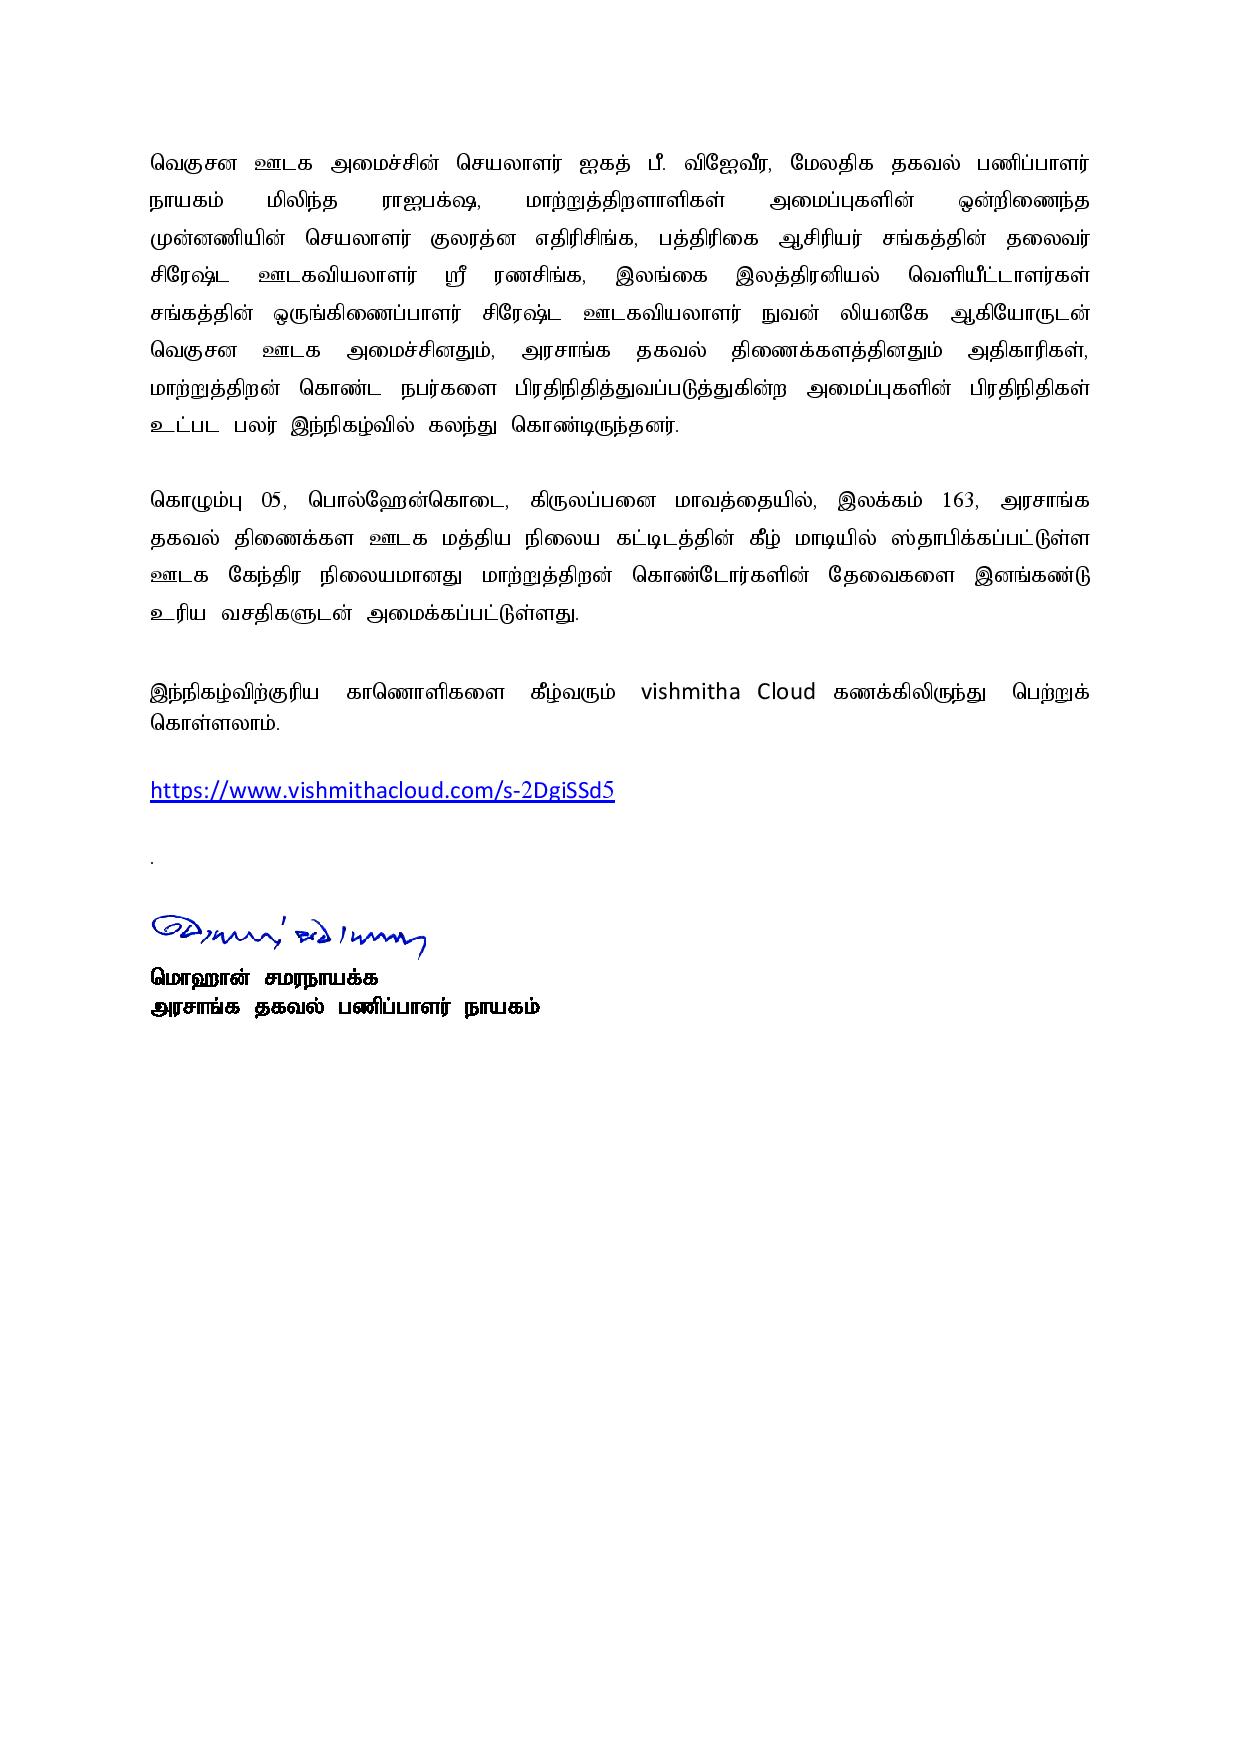 Press Release 970 Tamil page 003